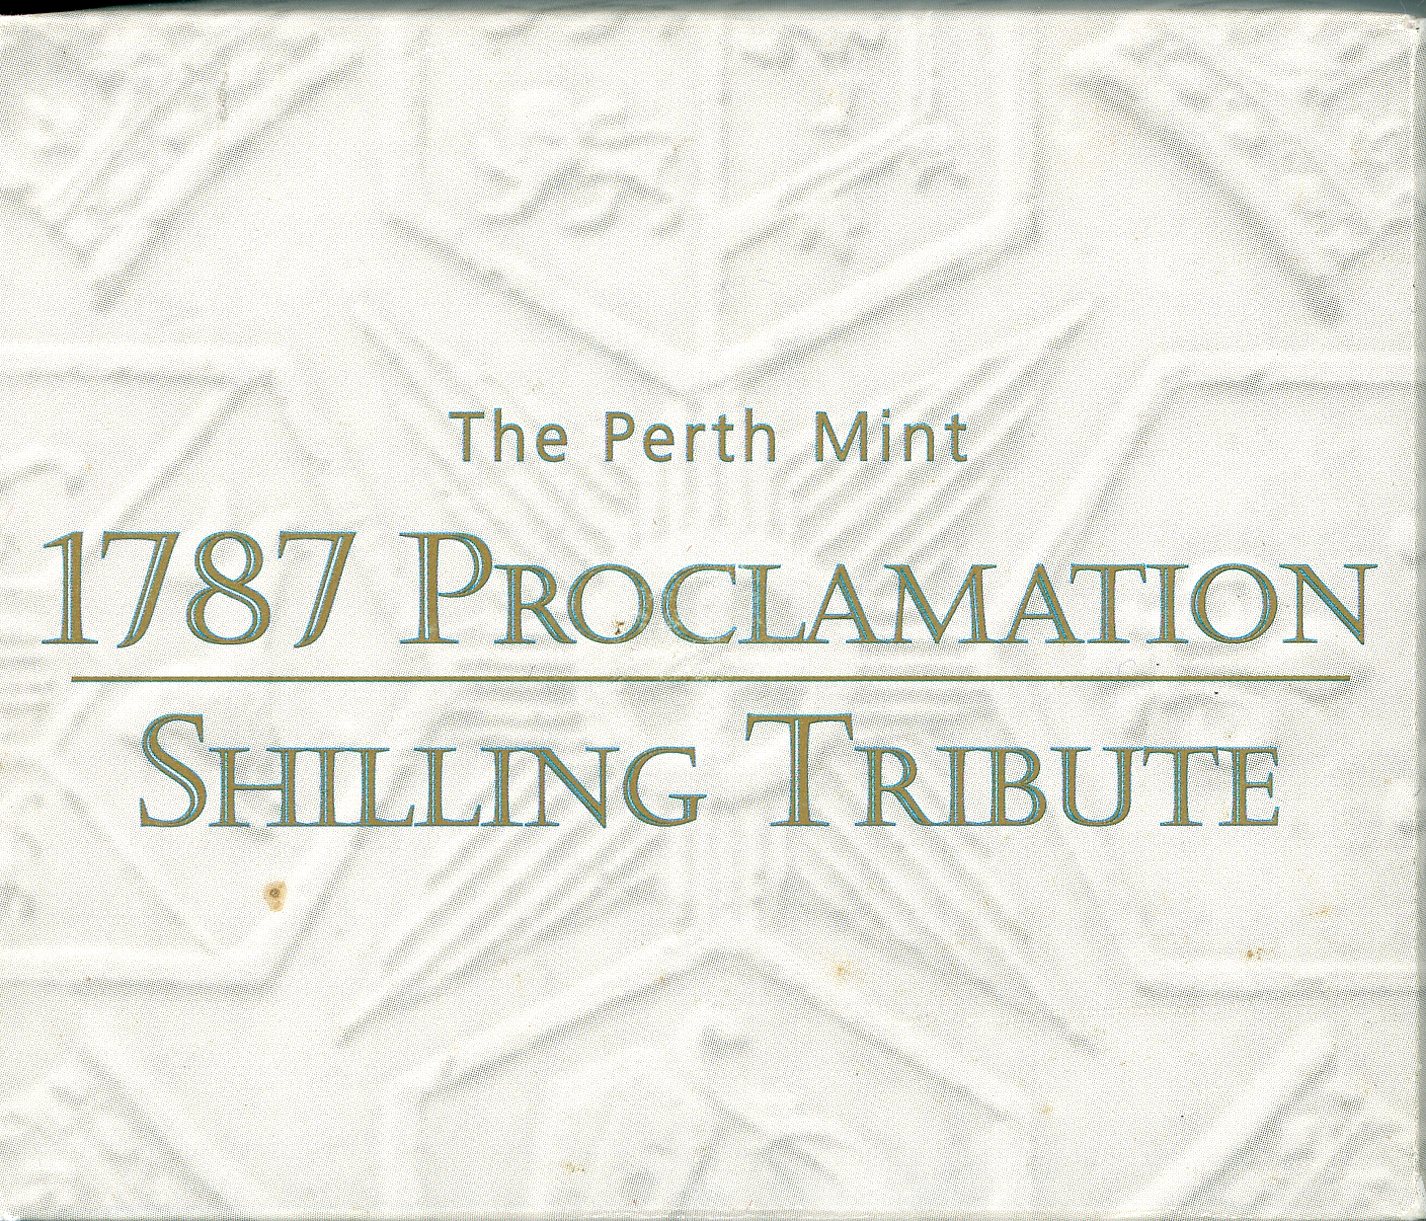 Thumbnail for 2008 - The 1787 Proclamation Shilling Tribute Silver Proof